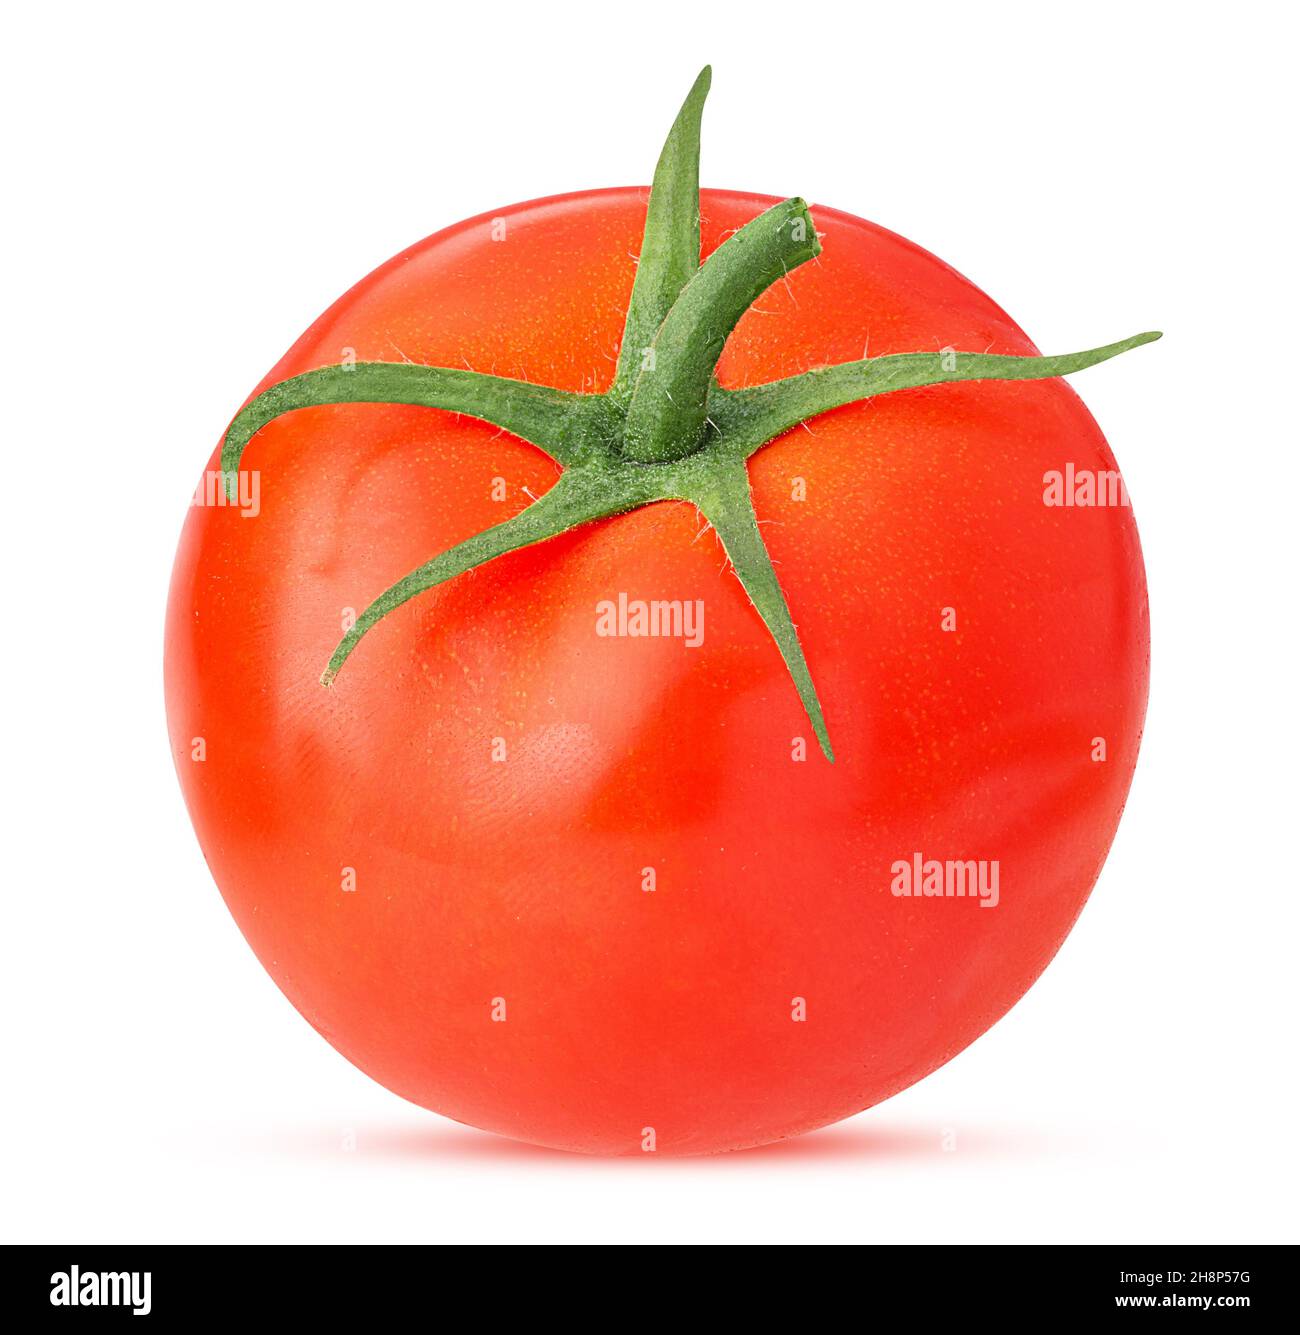 Fresh red tomato with green leaves isolated on white background Clipping Path. Full depth of field. Stock Photo